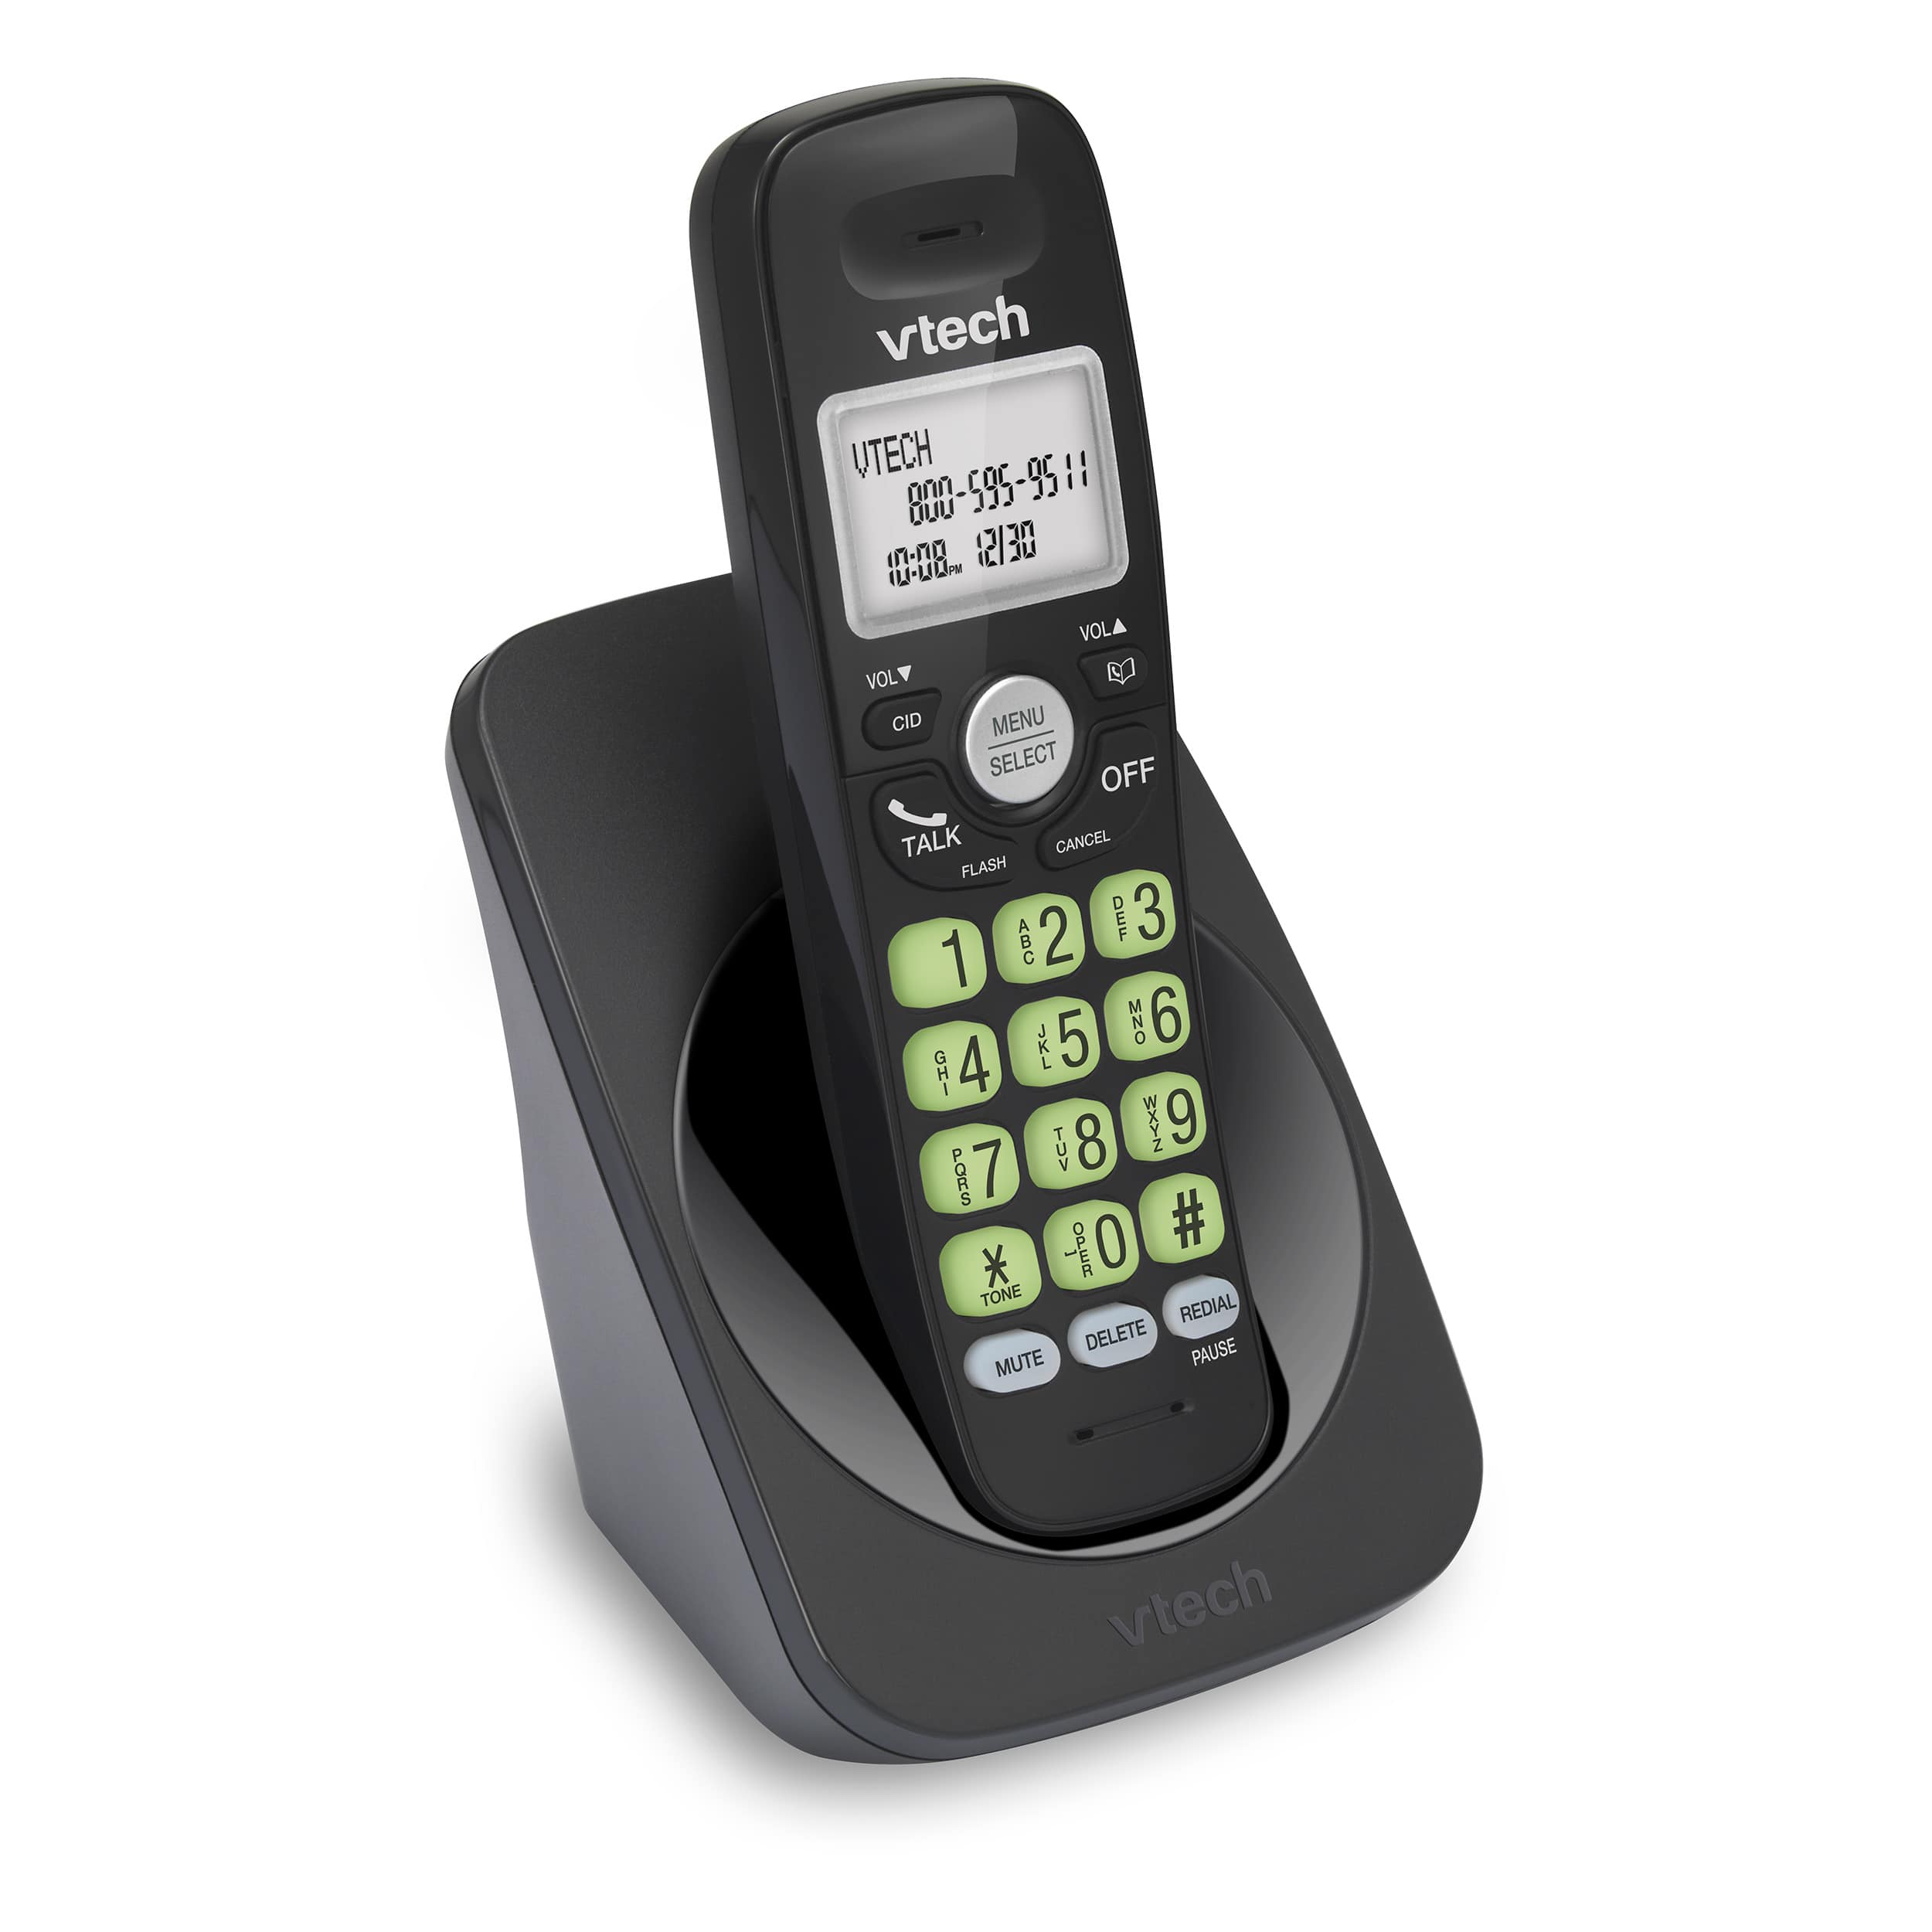 DECT 6.0 Cordless Phone with Full Duplex Speakerphone and Caller ID/Call Waiting (Black) - view 3